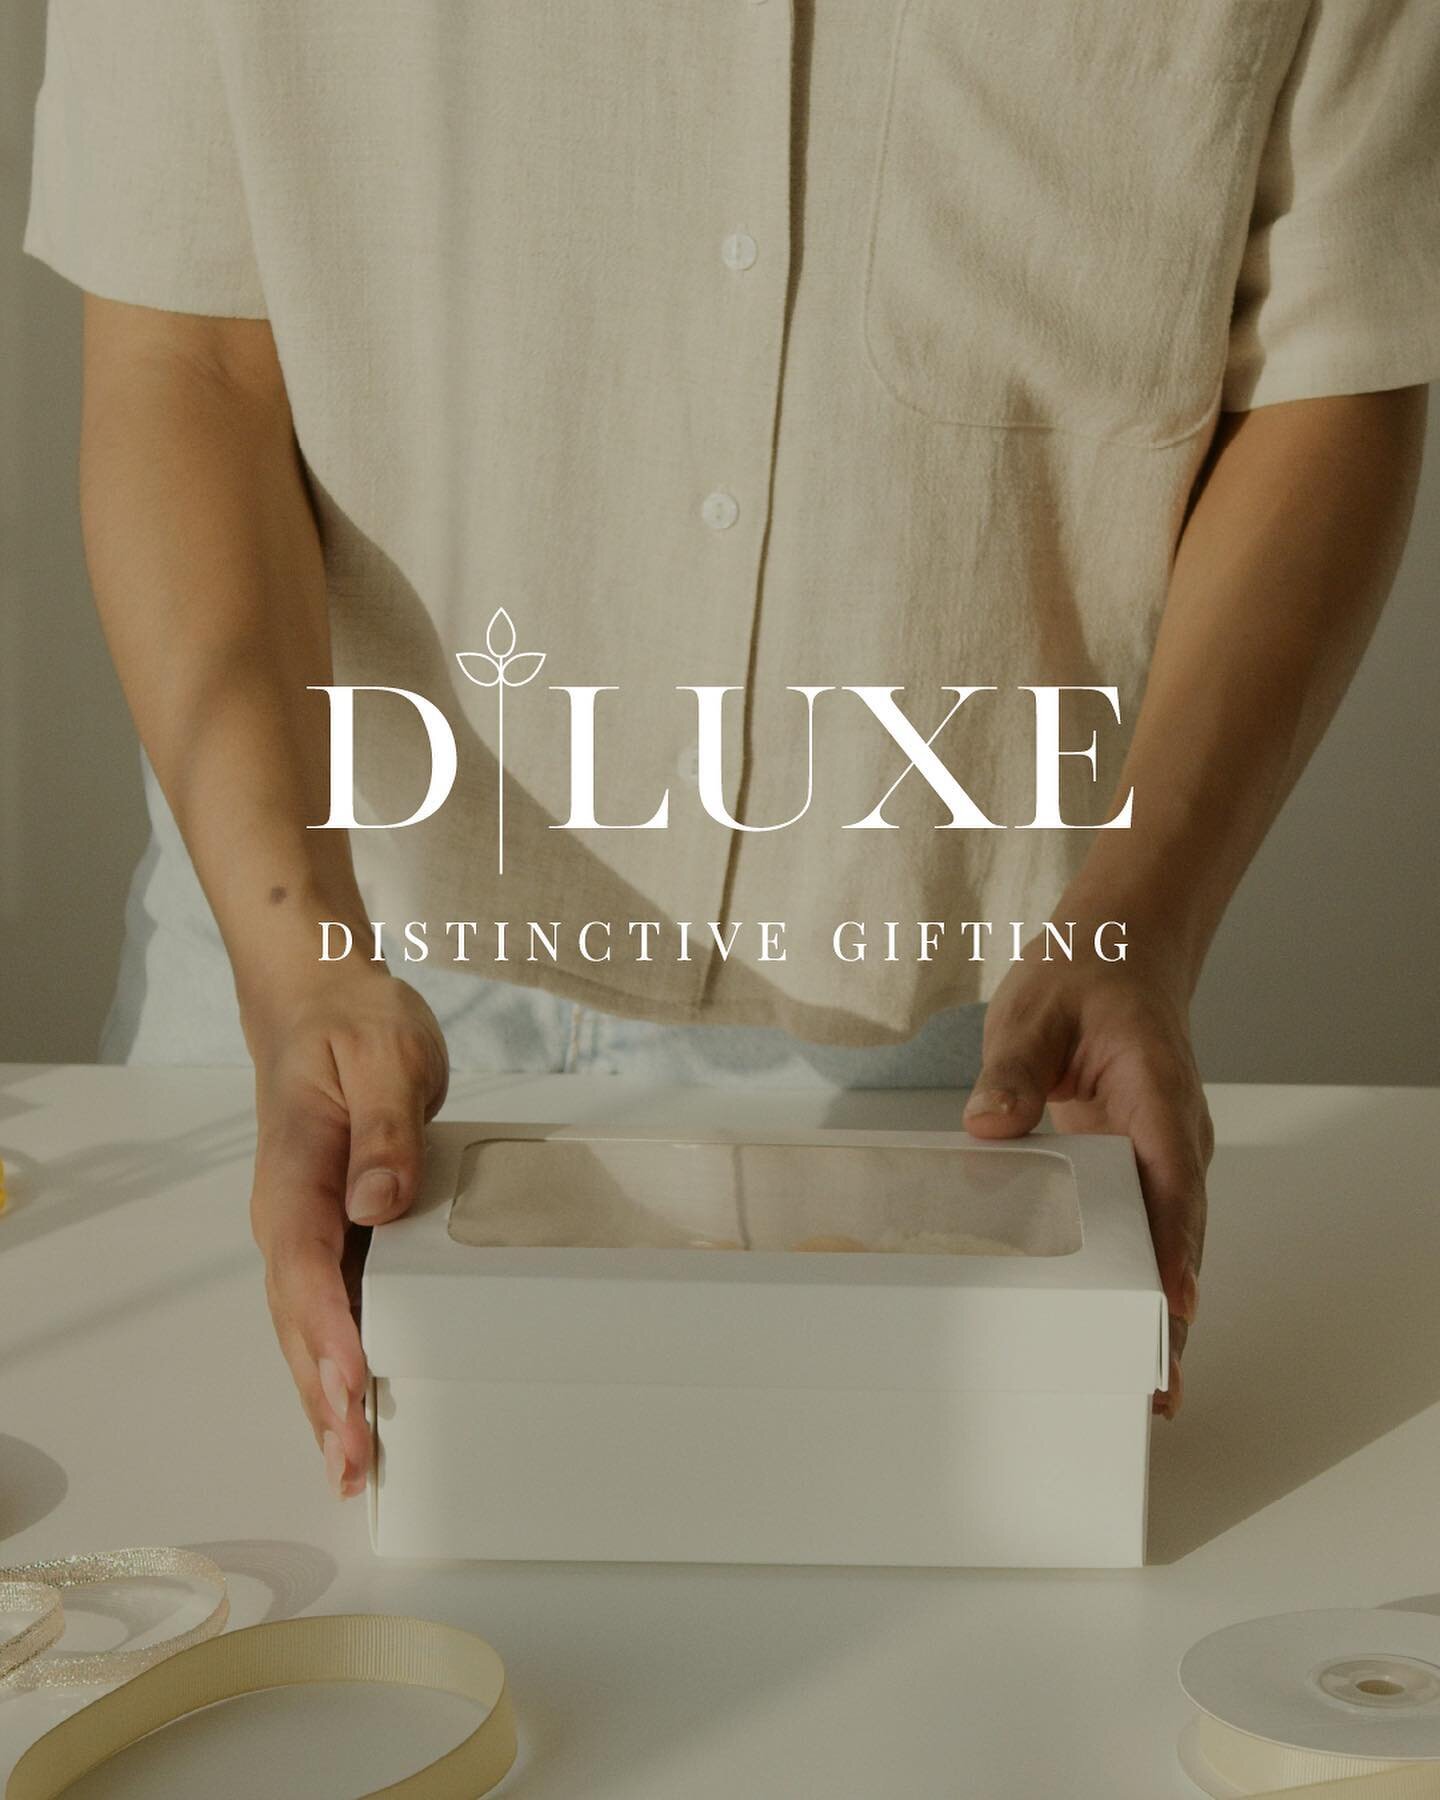 CLIENT SHOWCASE &bull; A closer look at the Brand Identity Design for D&rsquo;Luxe Distinctive Gifting.⁣
⁣
We decided on earthy tones, organic shapes and a minimalist design to reflect the brand values of this new business. Featuring a simple yet ele